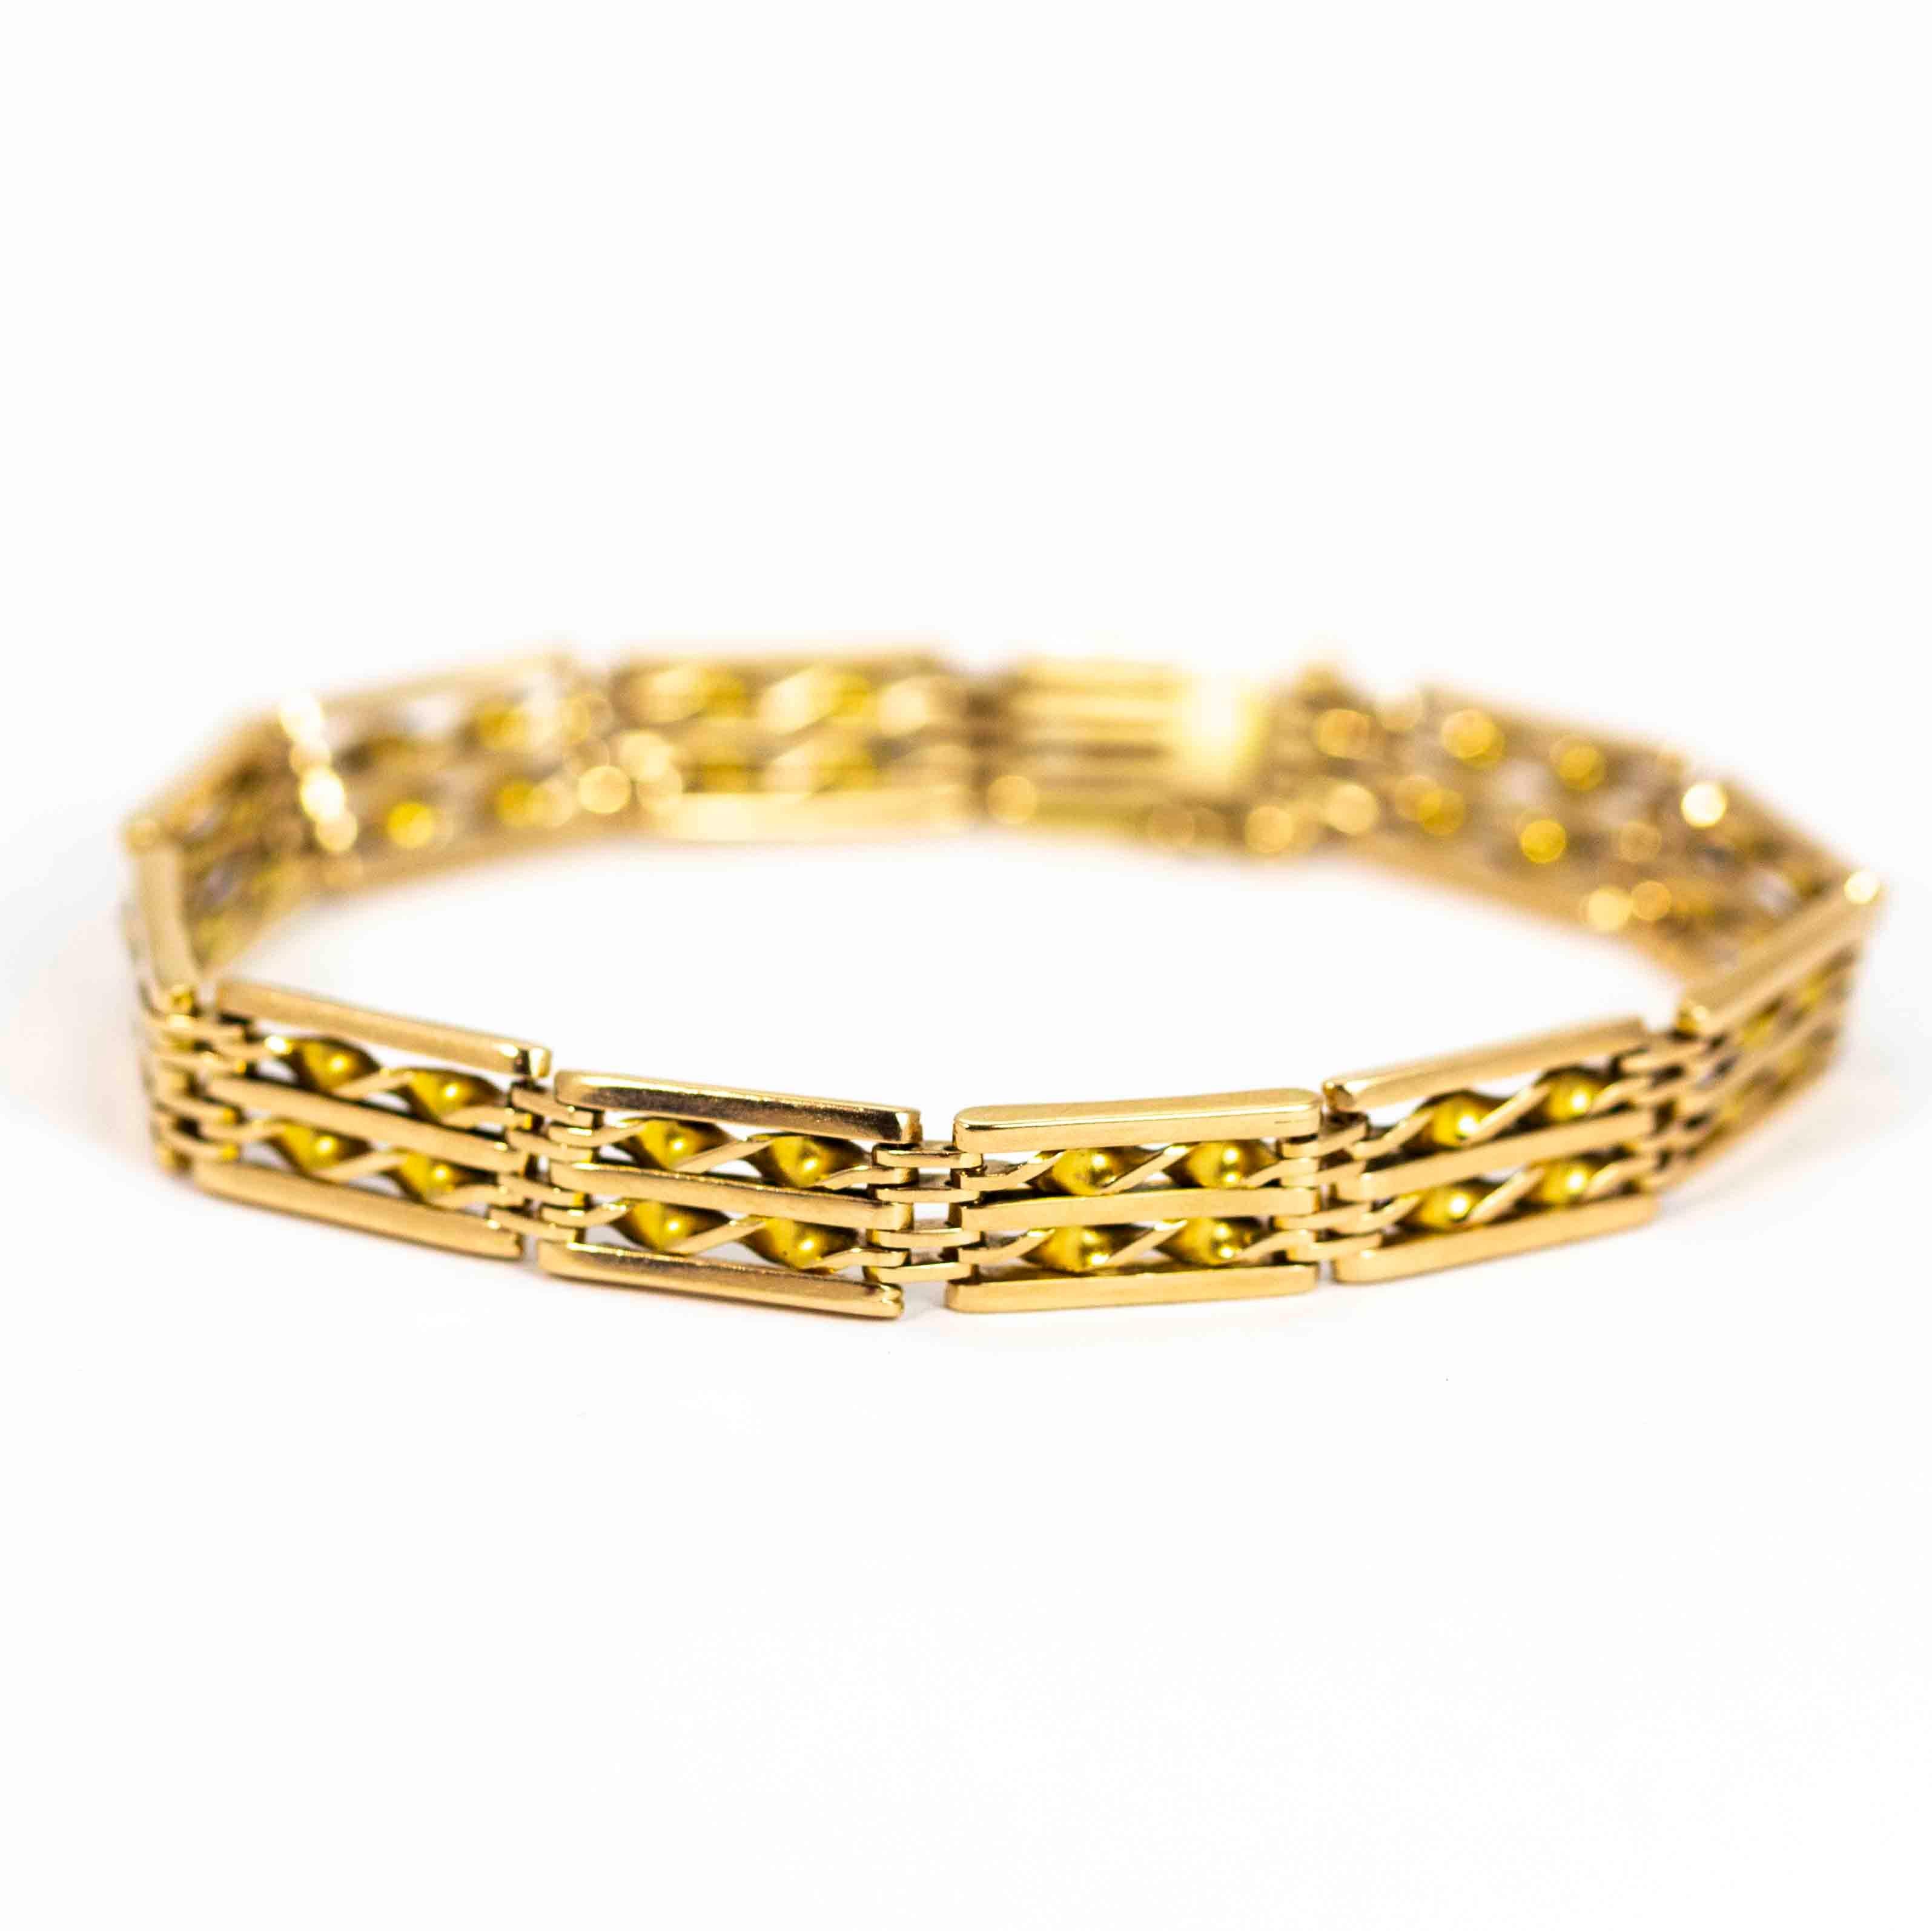 An exquisite vintage gate bracelet. Each chunky link is composed of five bars, with the central two elegantly twisted for contrast. Modelled in 15 carat yellow gold.

Length: 7.5 inches